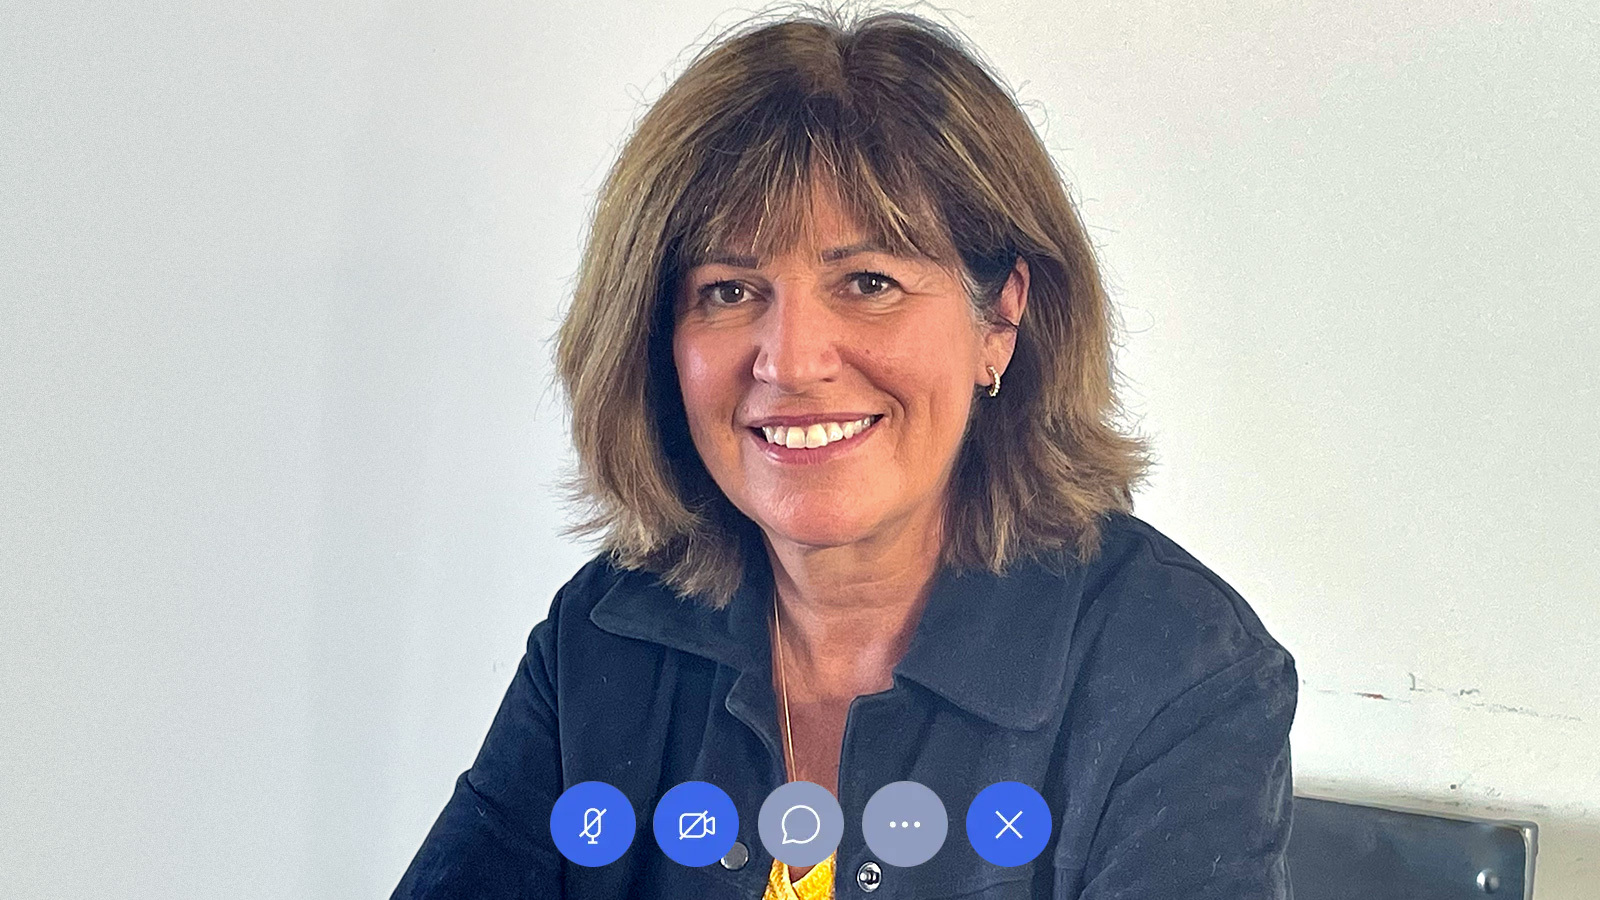 Nadine Pichelot, professional business woman wearing jacket with a zoom meeting user interface overlay